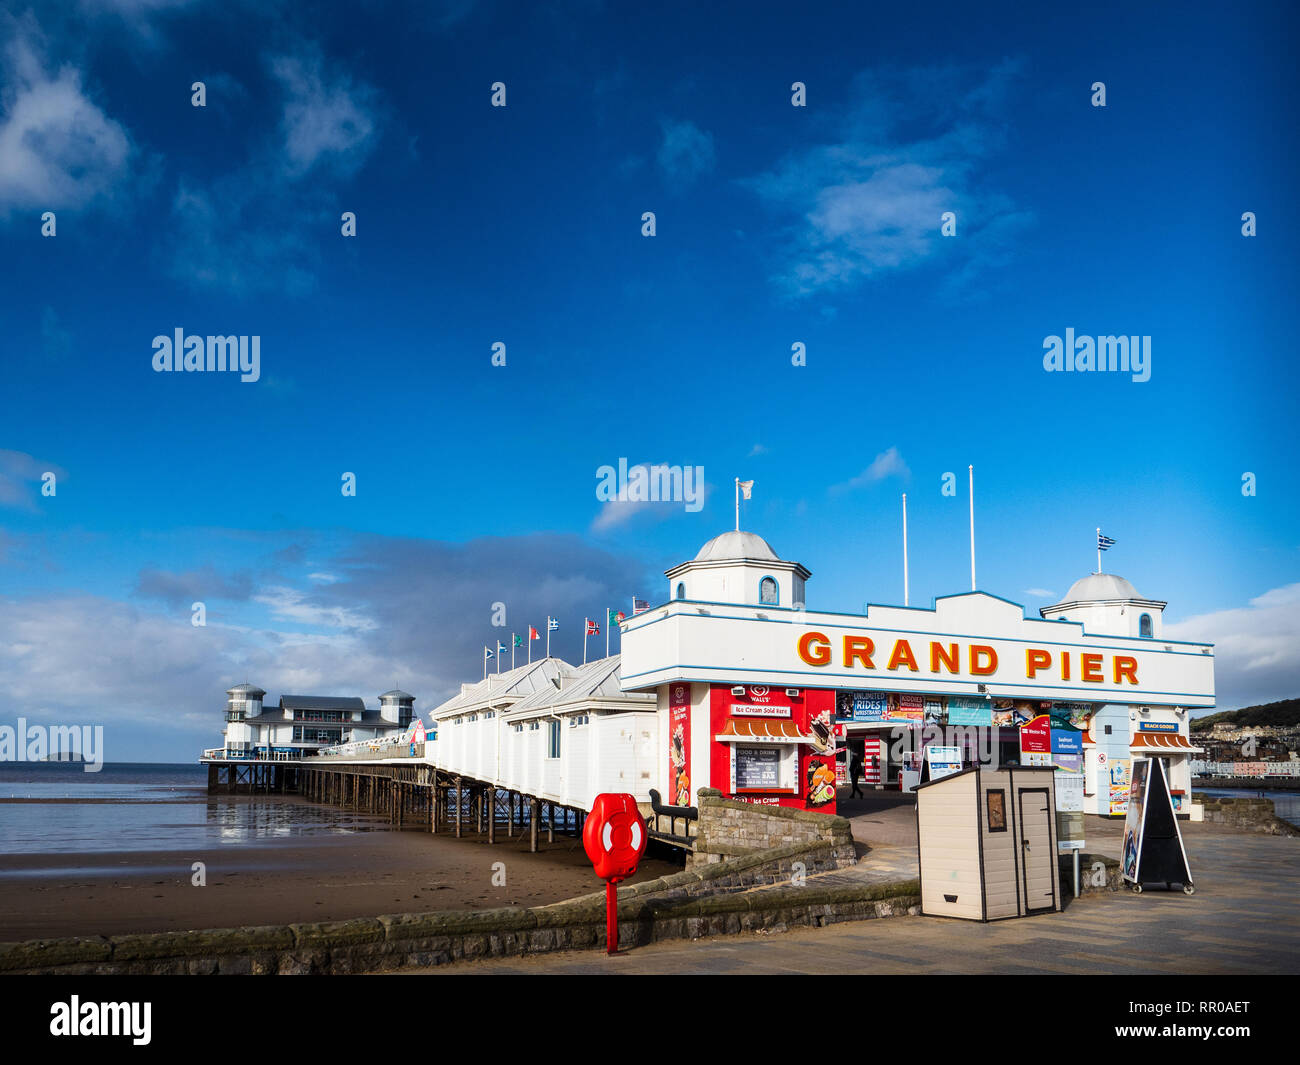 Grand Pier Weston-super-Mare - opened 1904  refurbished 2008 -10 following a fire. 366m in length. Stock Photo